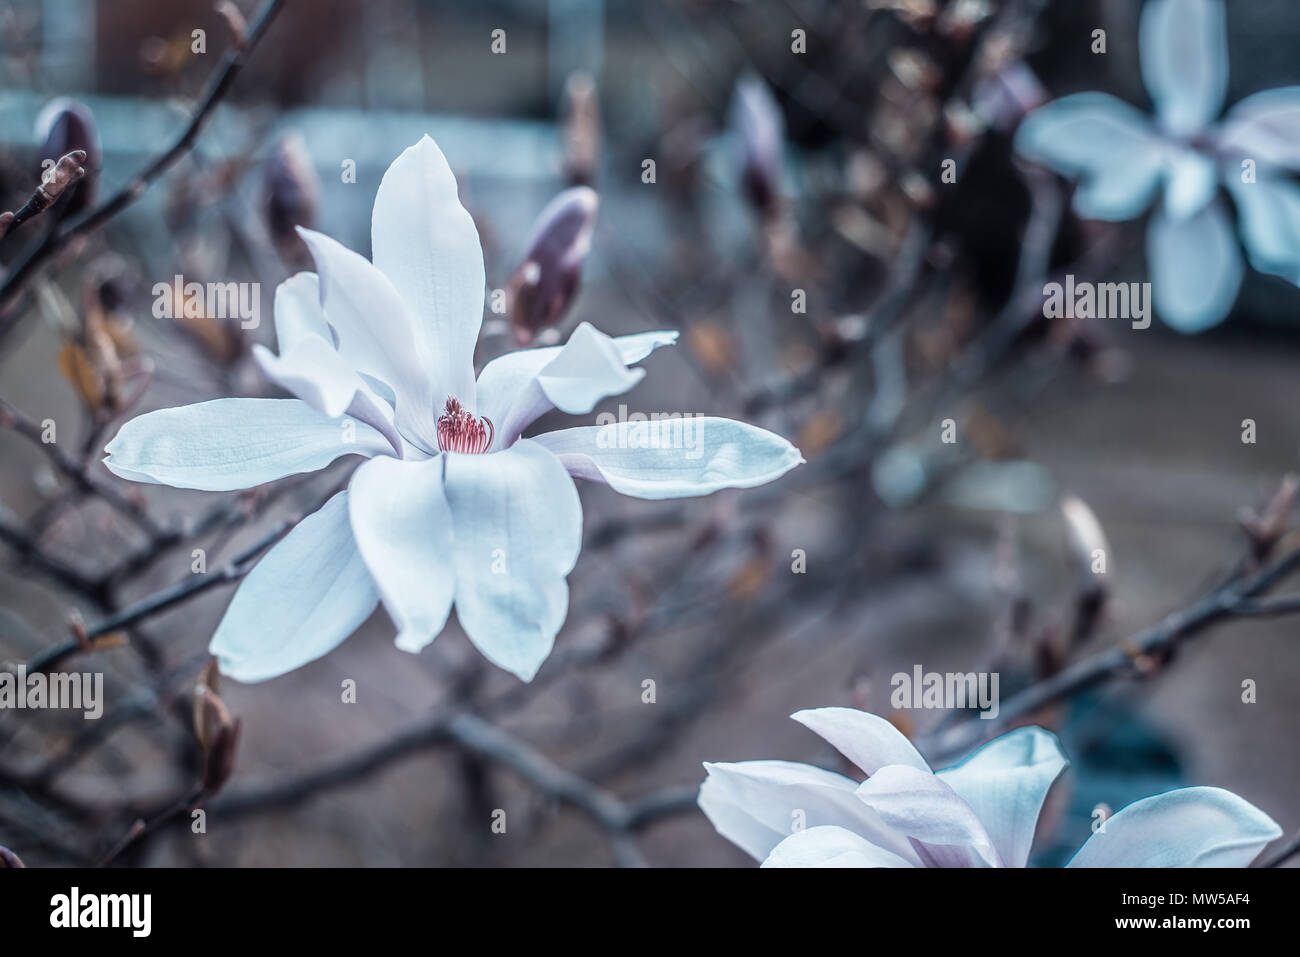 A view of magnolias flower buds. Pink and purple magnolia flowers. Garden work. Stock Photo